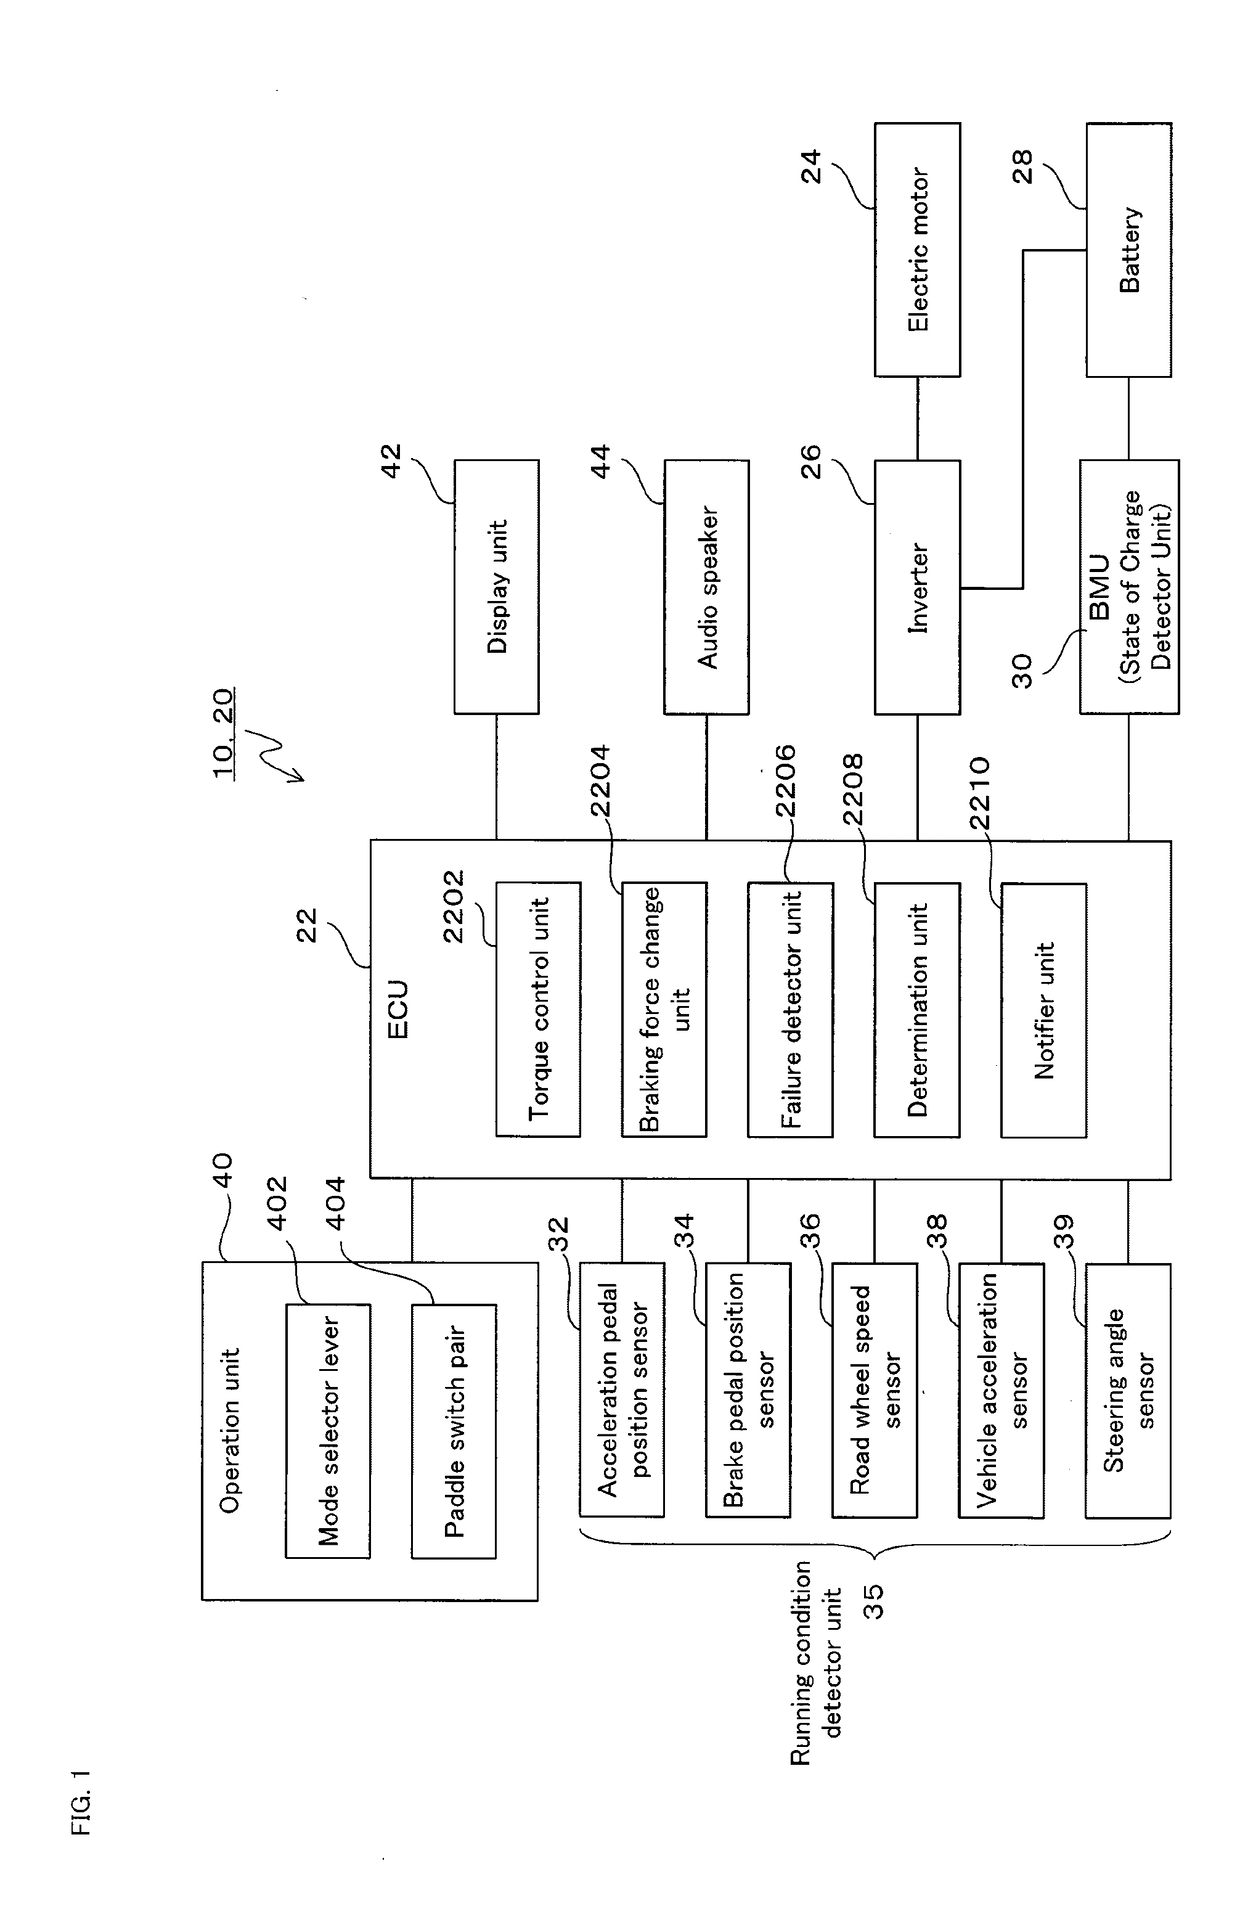 Regenerative braking control apparatus for electrically driven vehicle